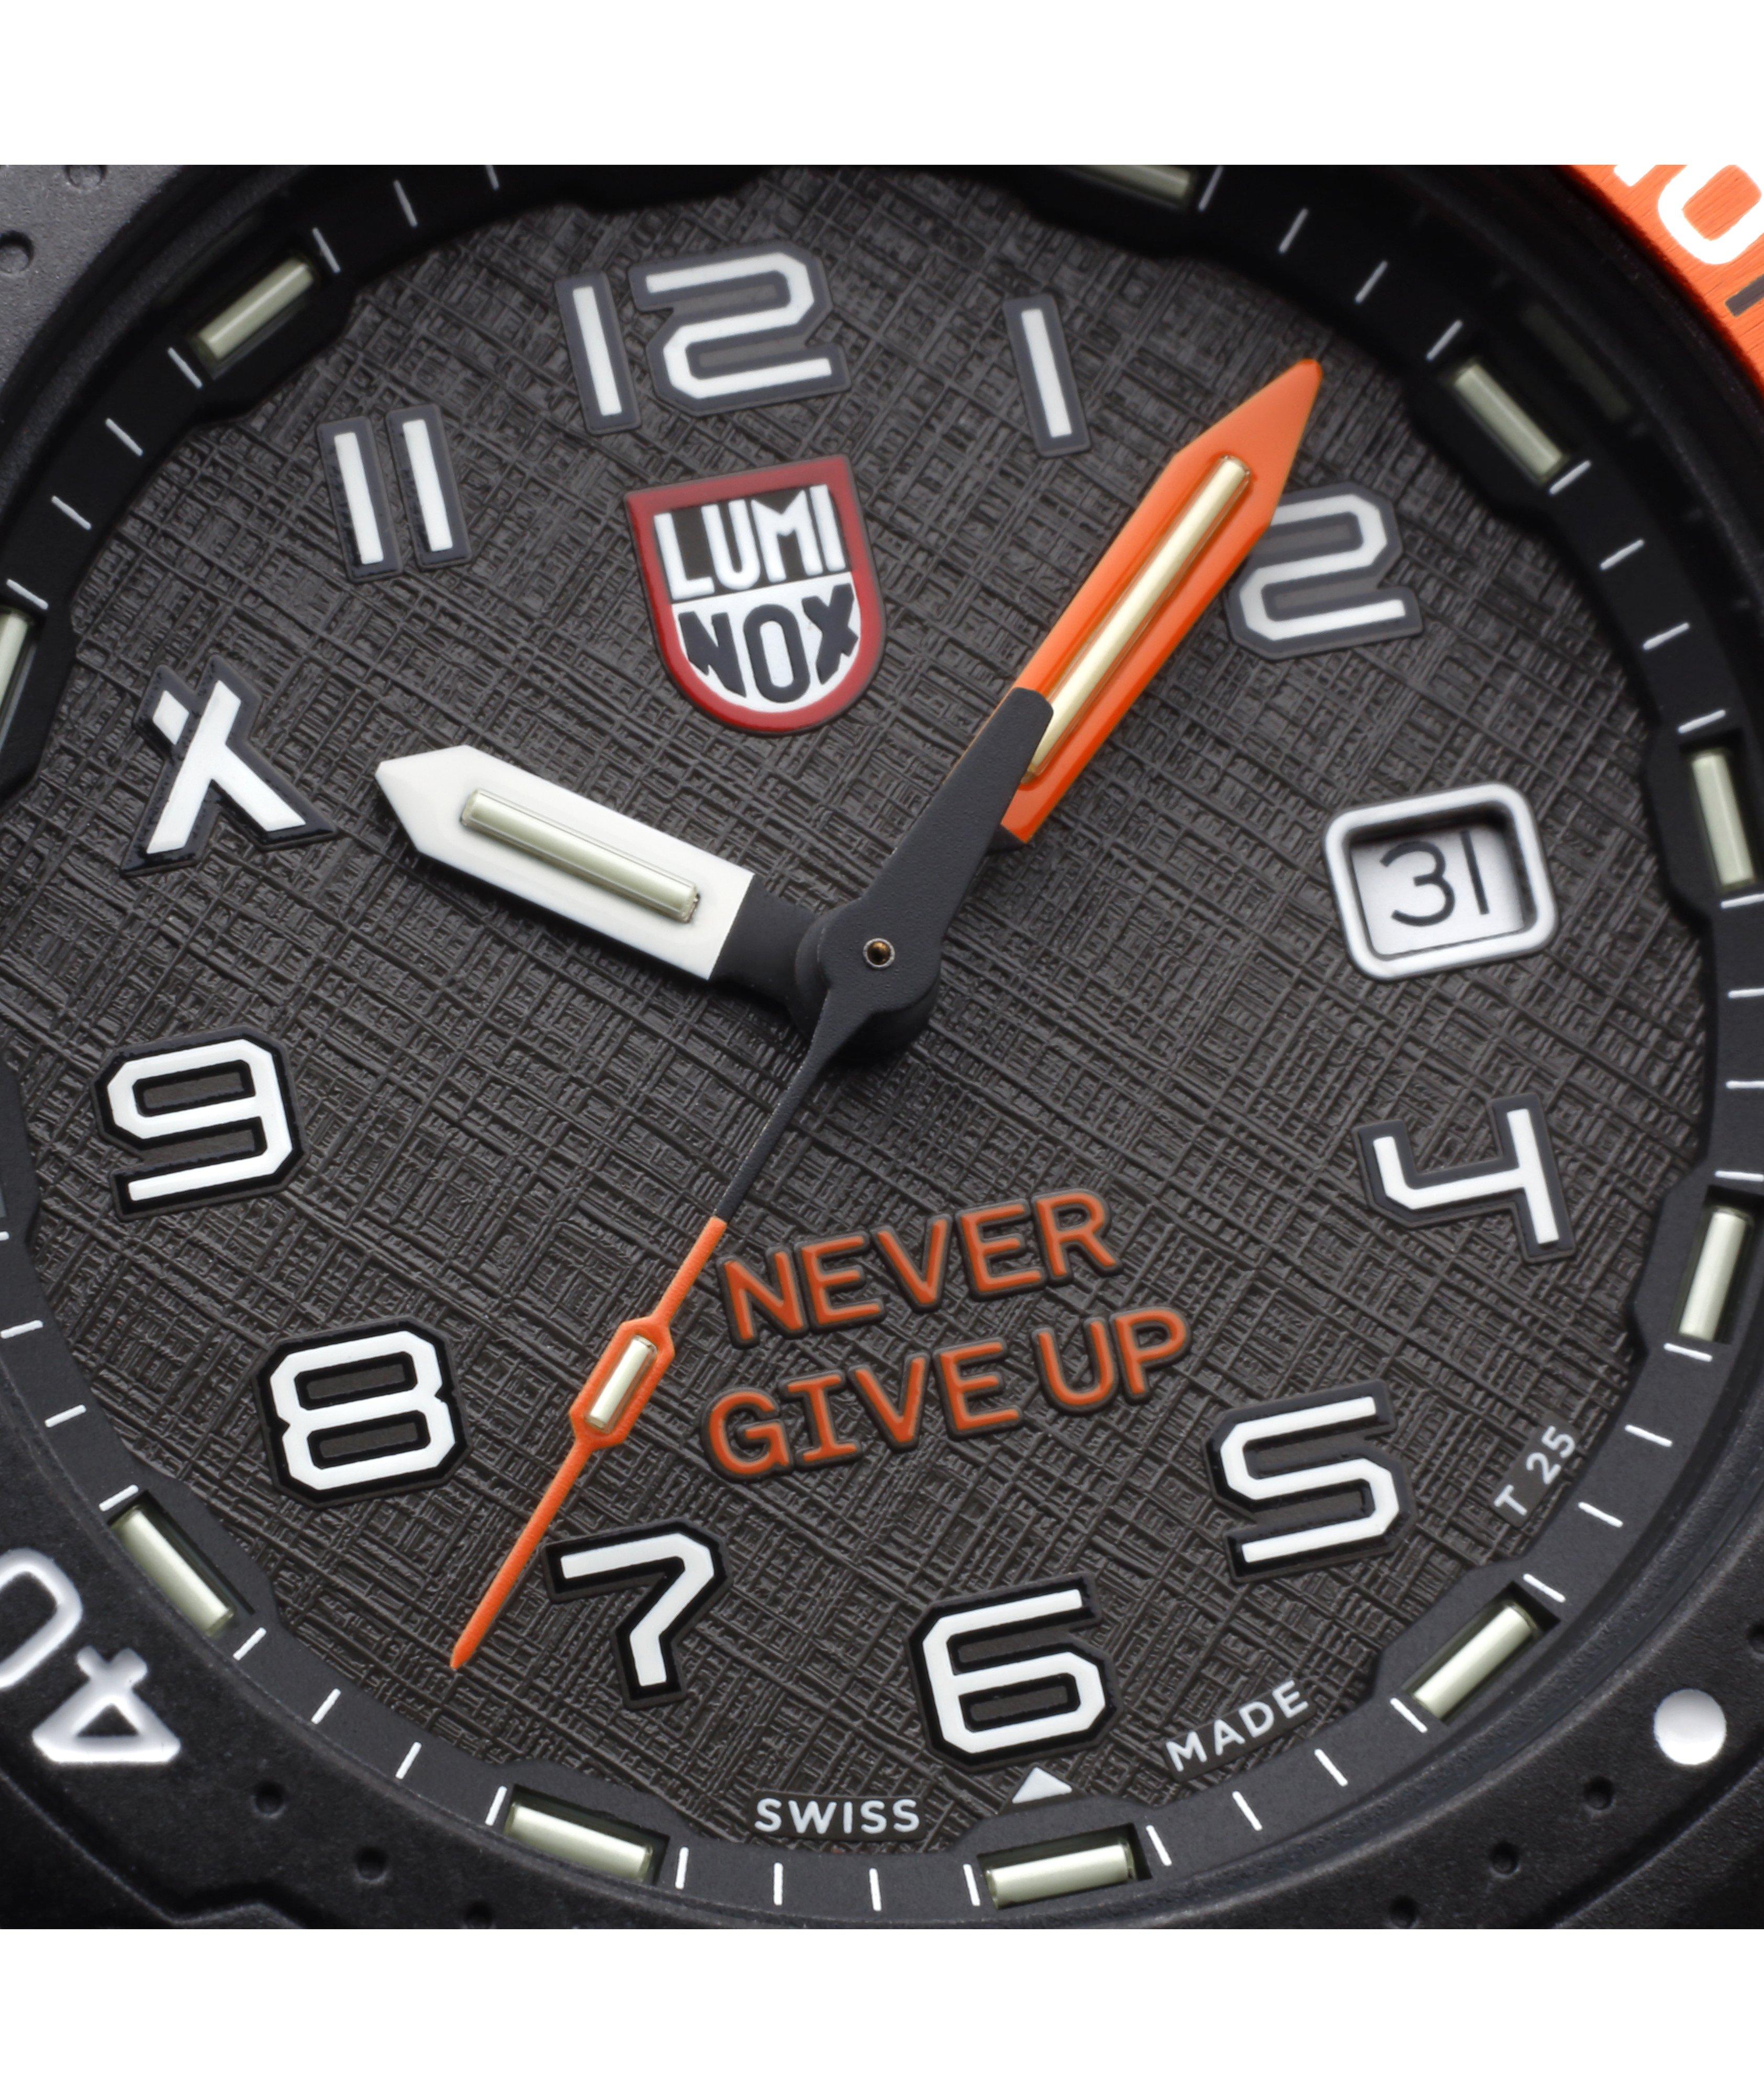 Bear Grylls 3729 Never Give Up Watch image 2